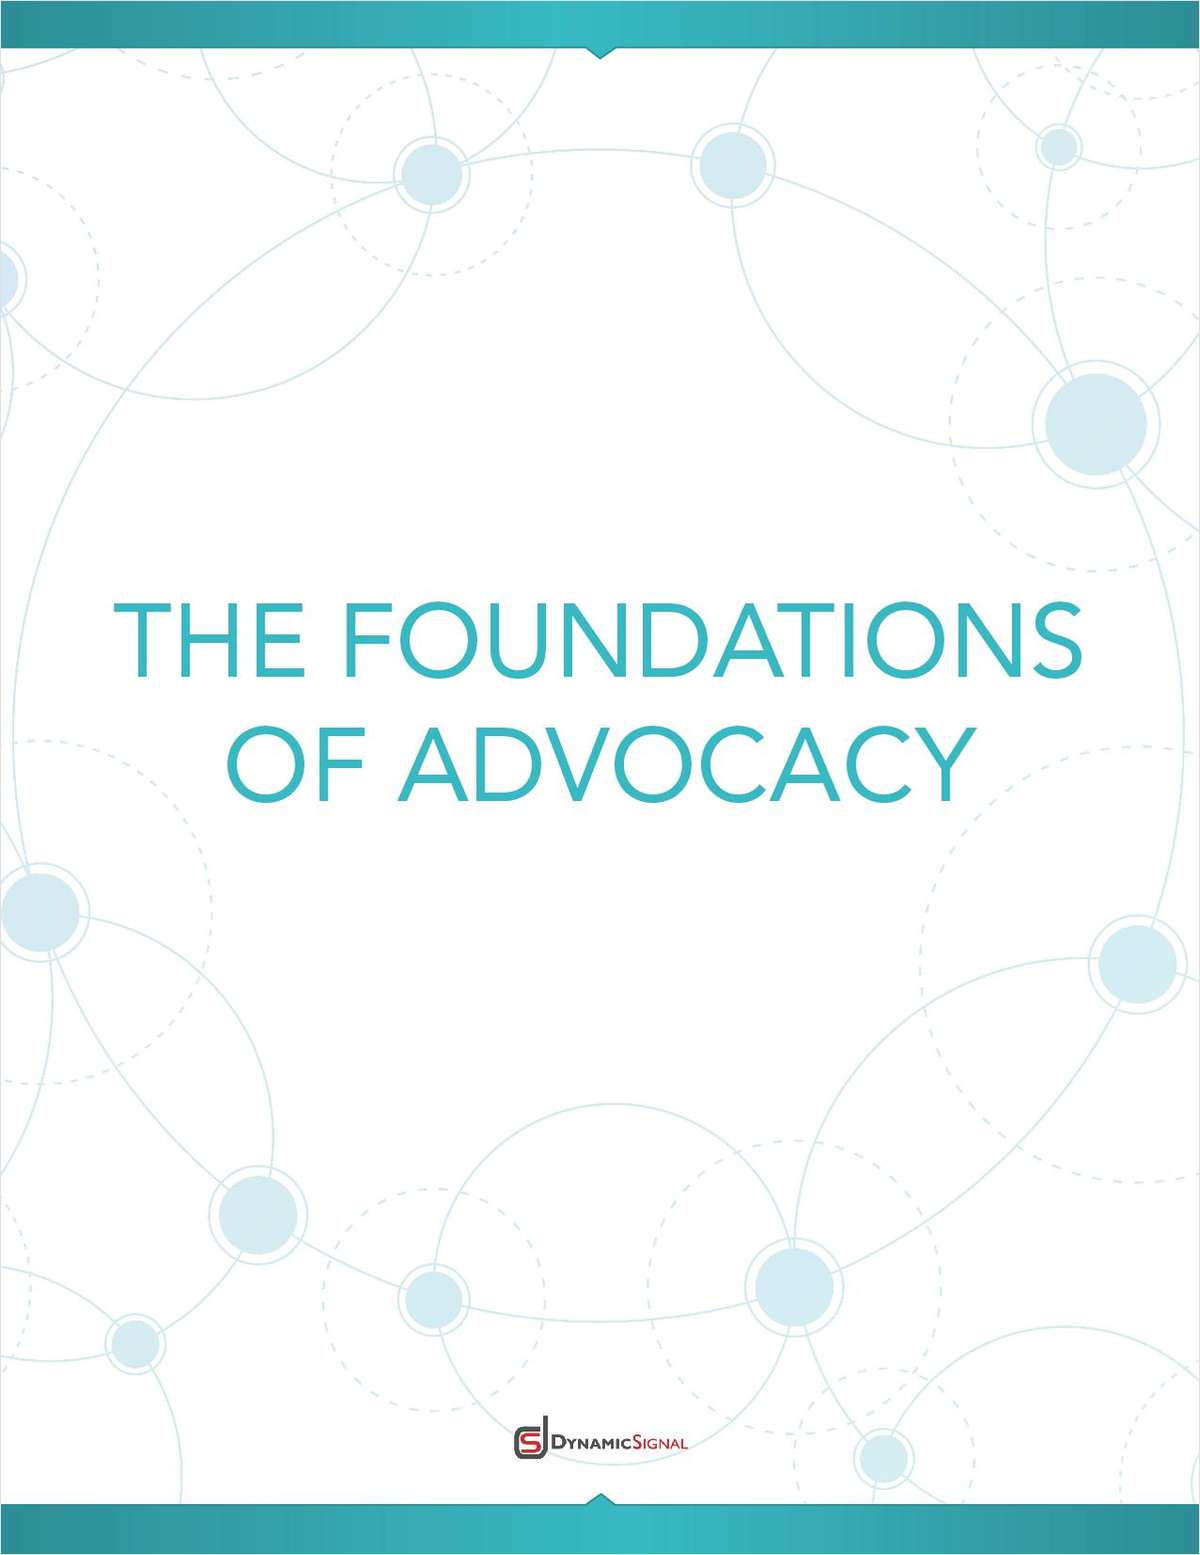 The Foundations of Advocacy